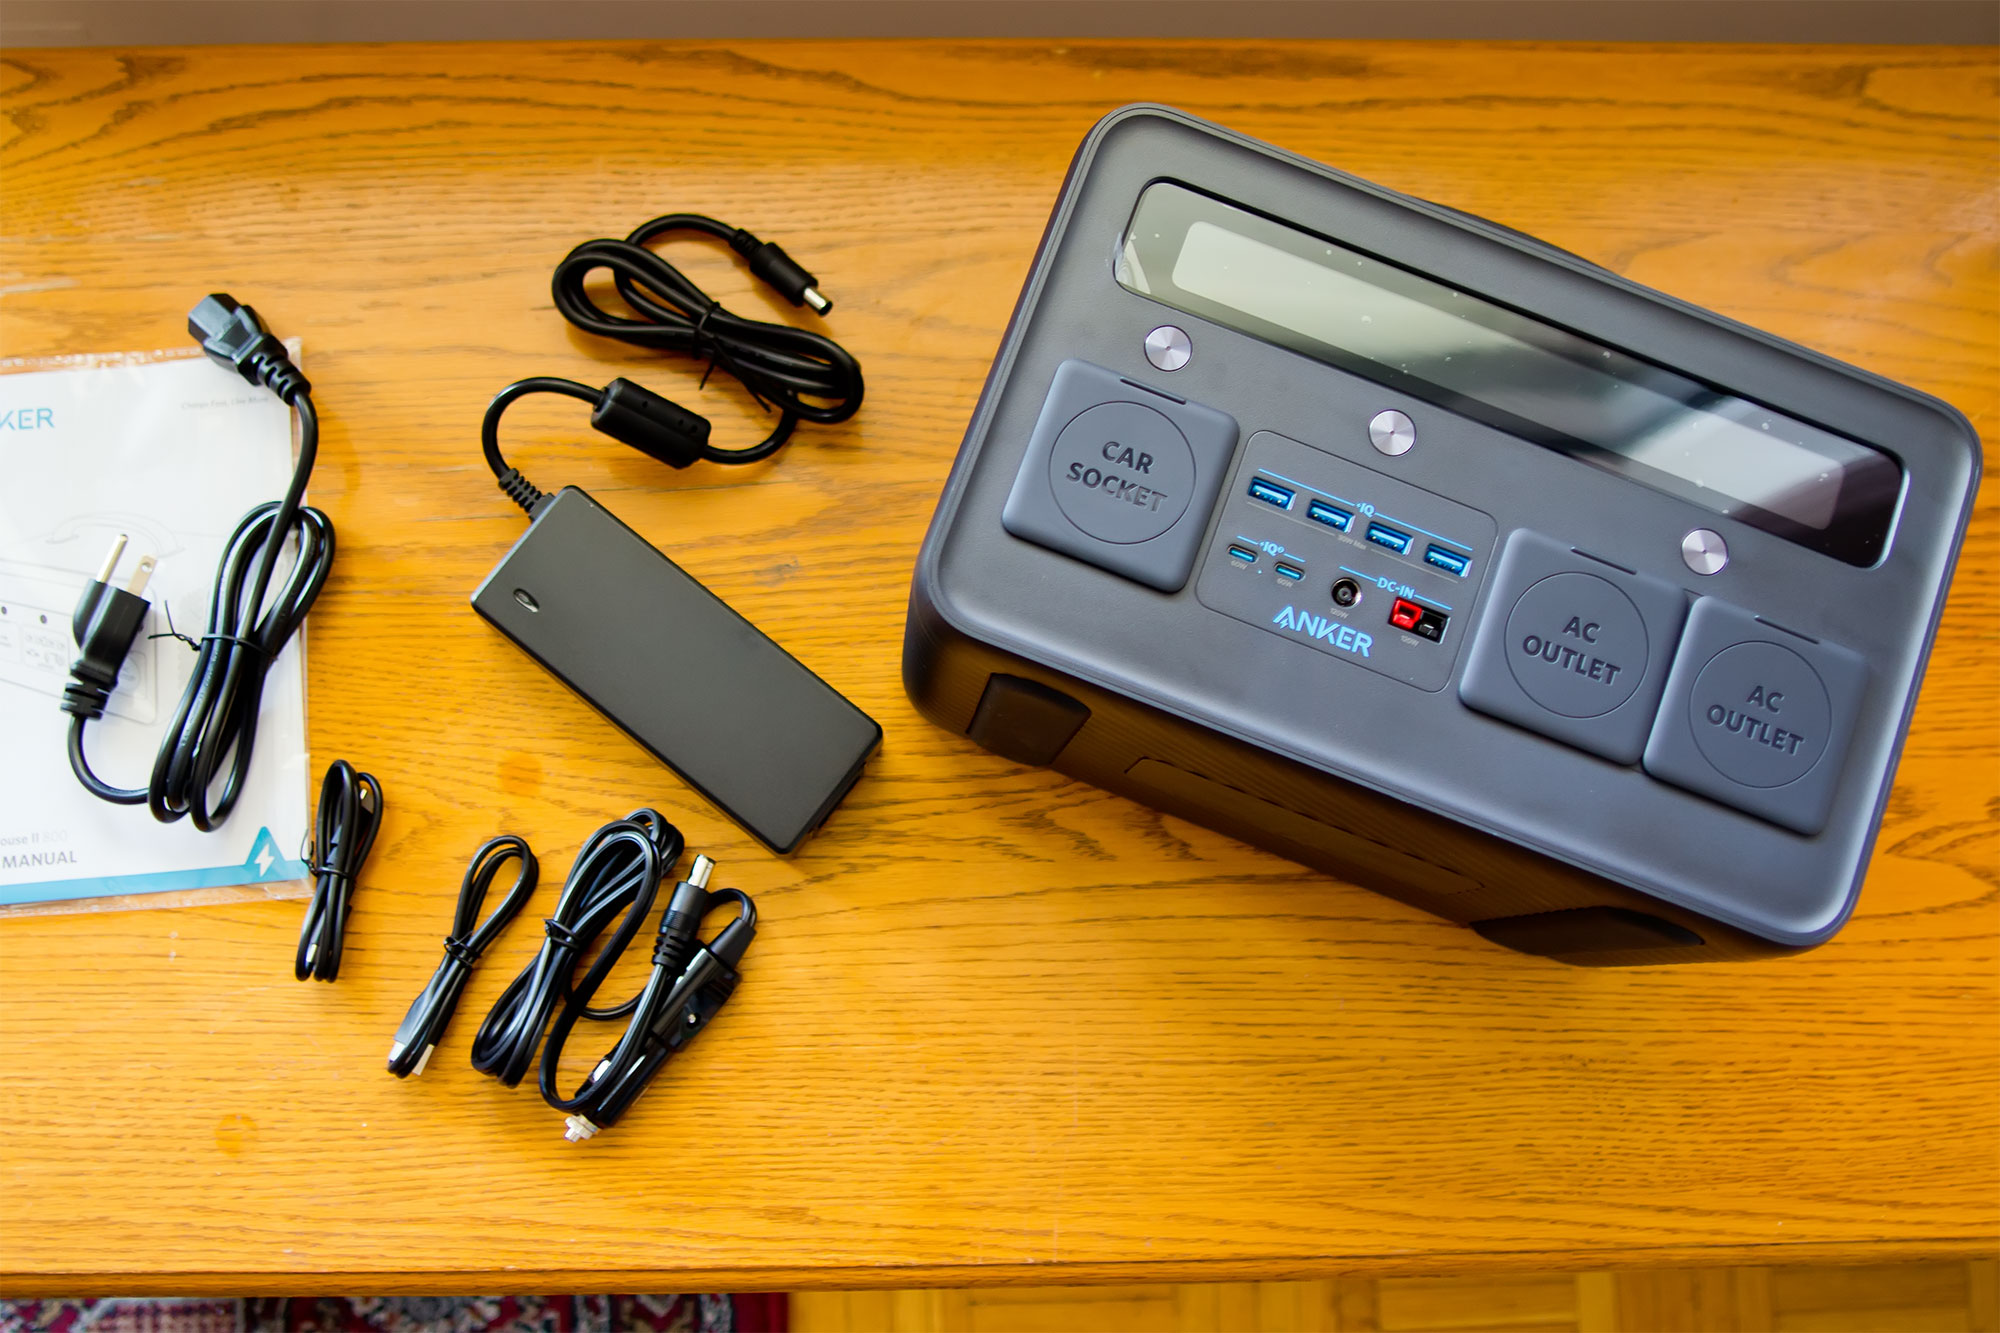 Review: Anker PowerHouse II 800 portable power station